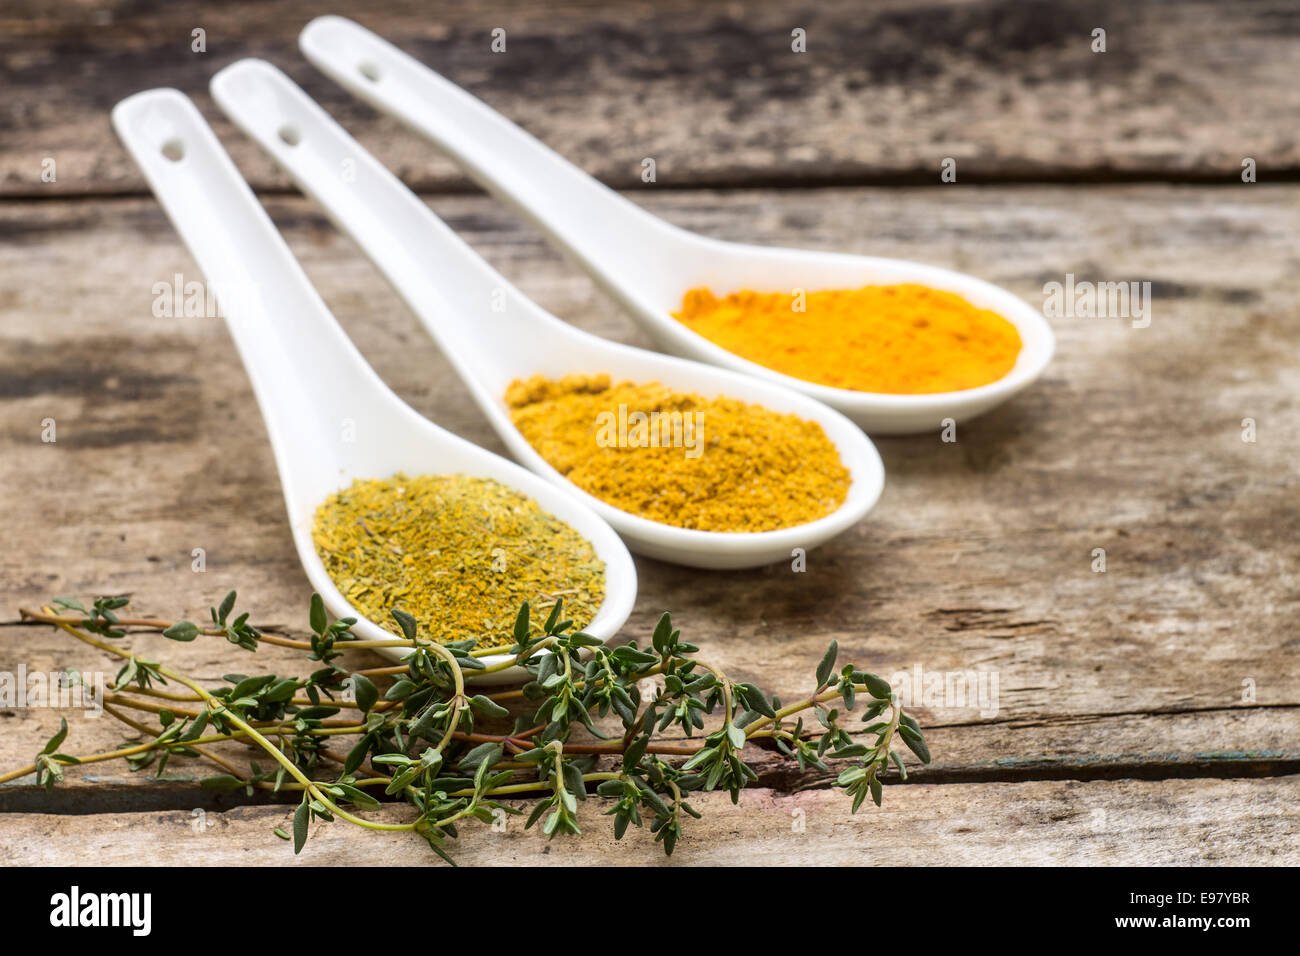 Spices recipe background. Diversity of spice powder mix with branch of thyme Stock Photo